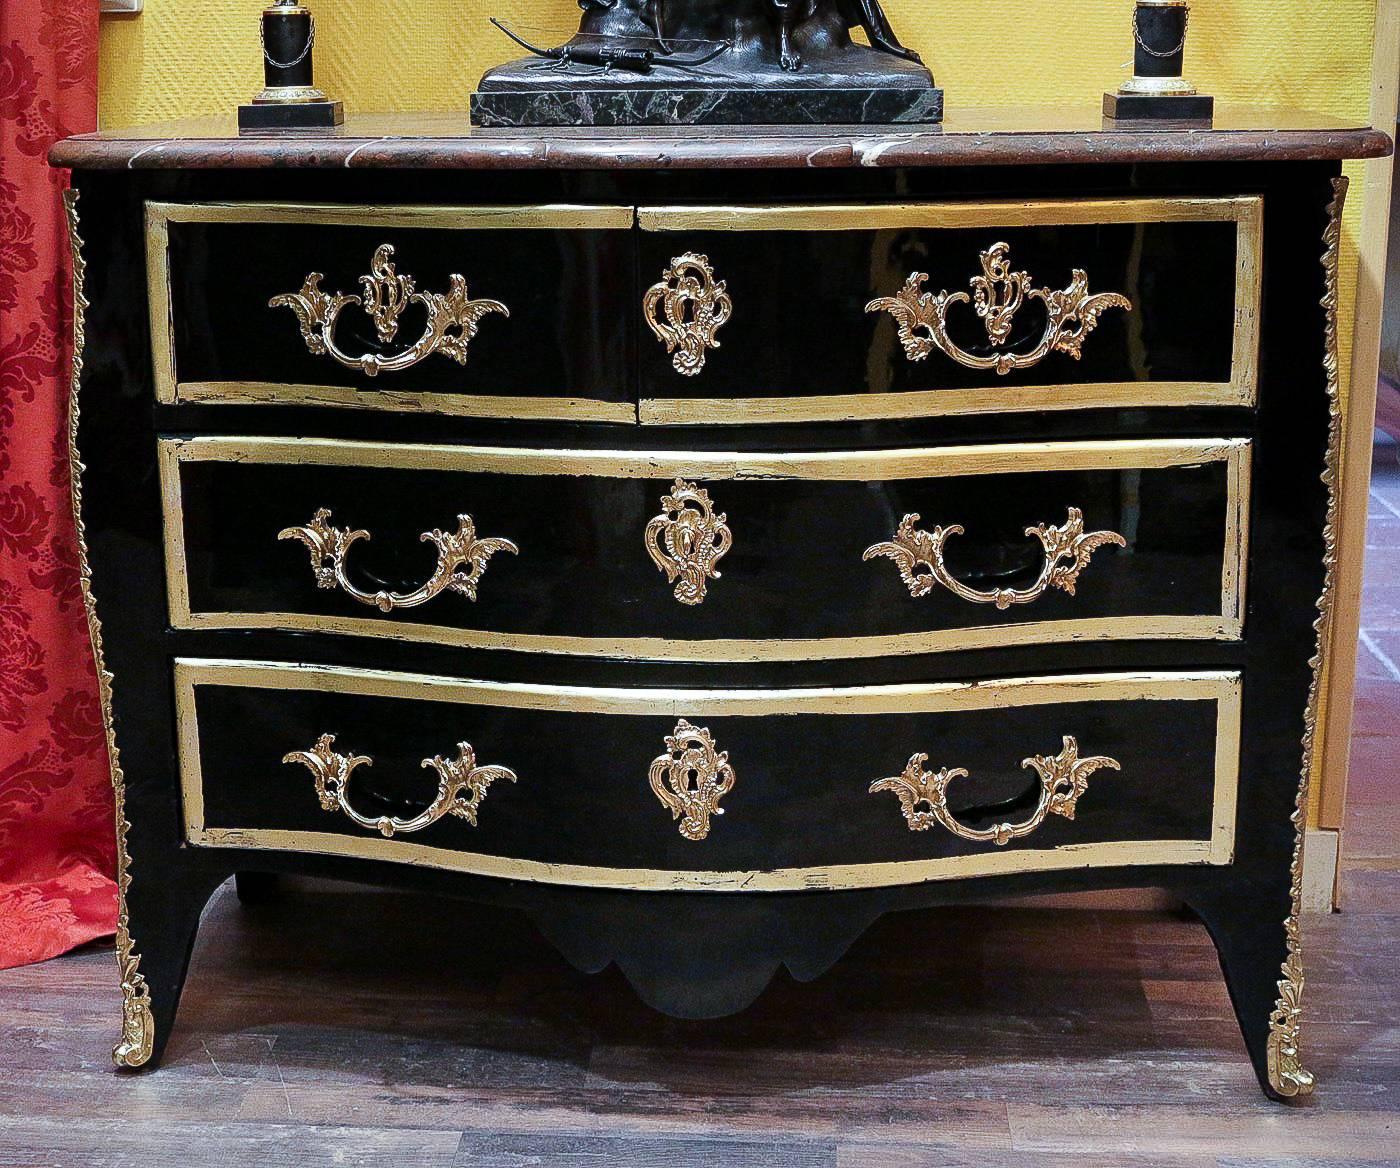 Fruitwood French Regence Period Serpentine Black Lacquered Commode, circa 1720-1730